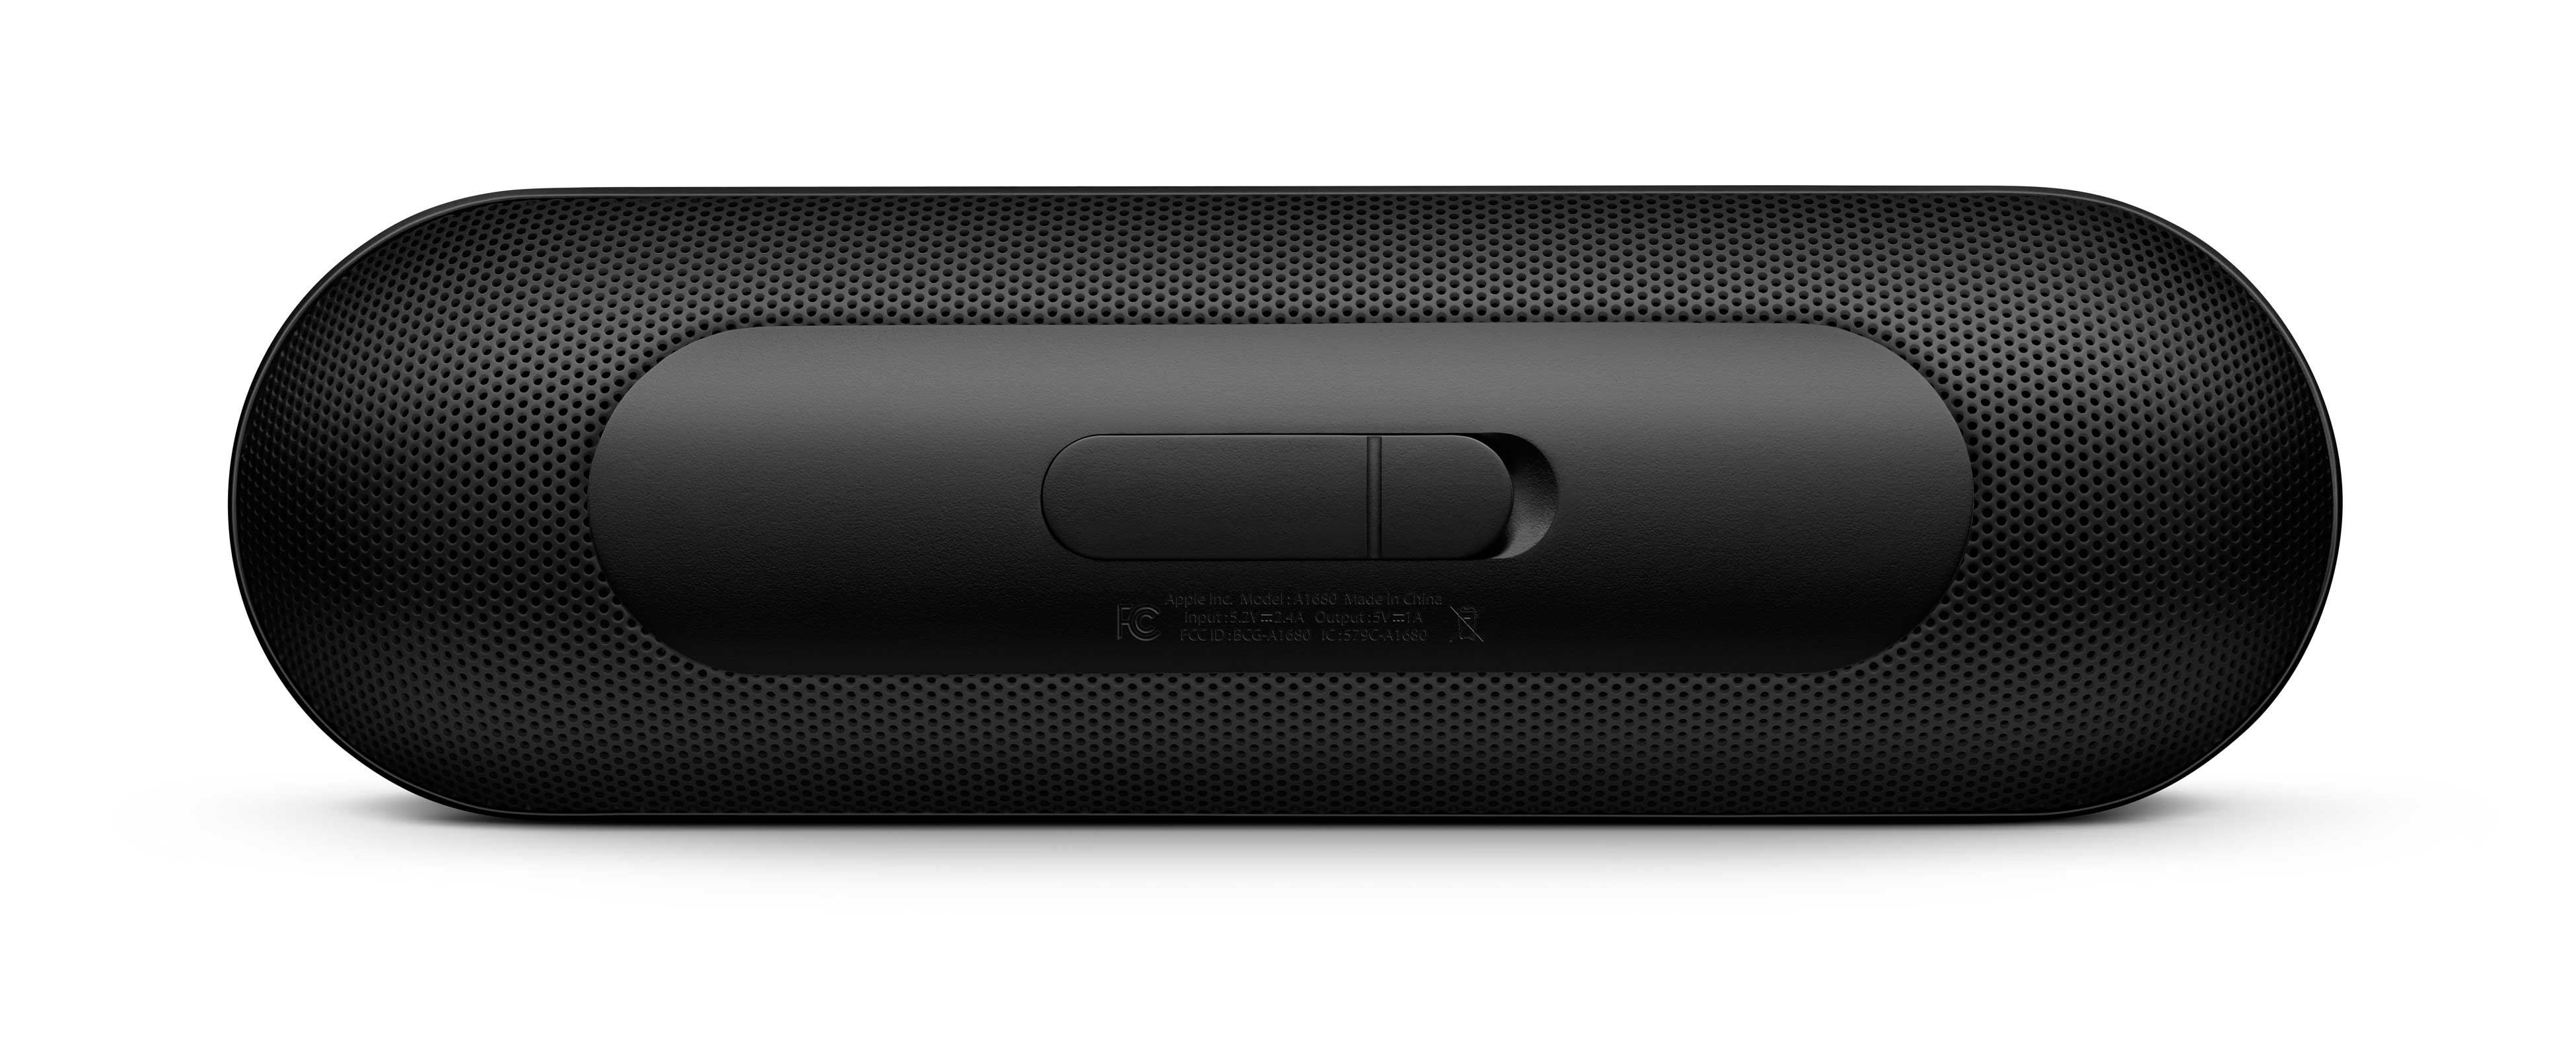 Beats by Dr. Dre Pill+ Portable Bluetooth Speaker, Black, ML4M2LL/A - image 4 of 10